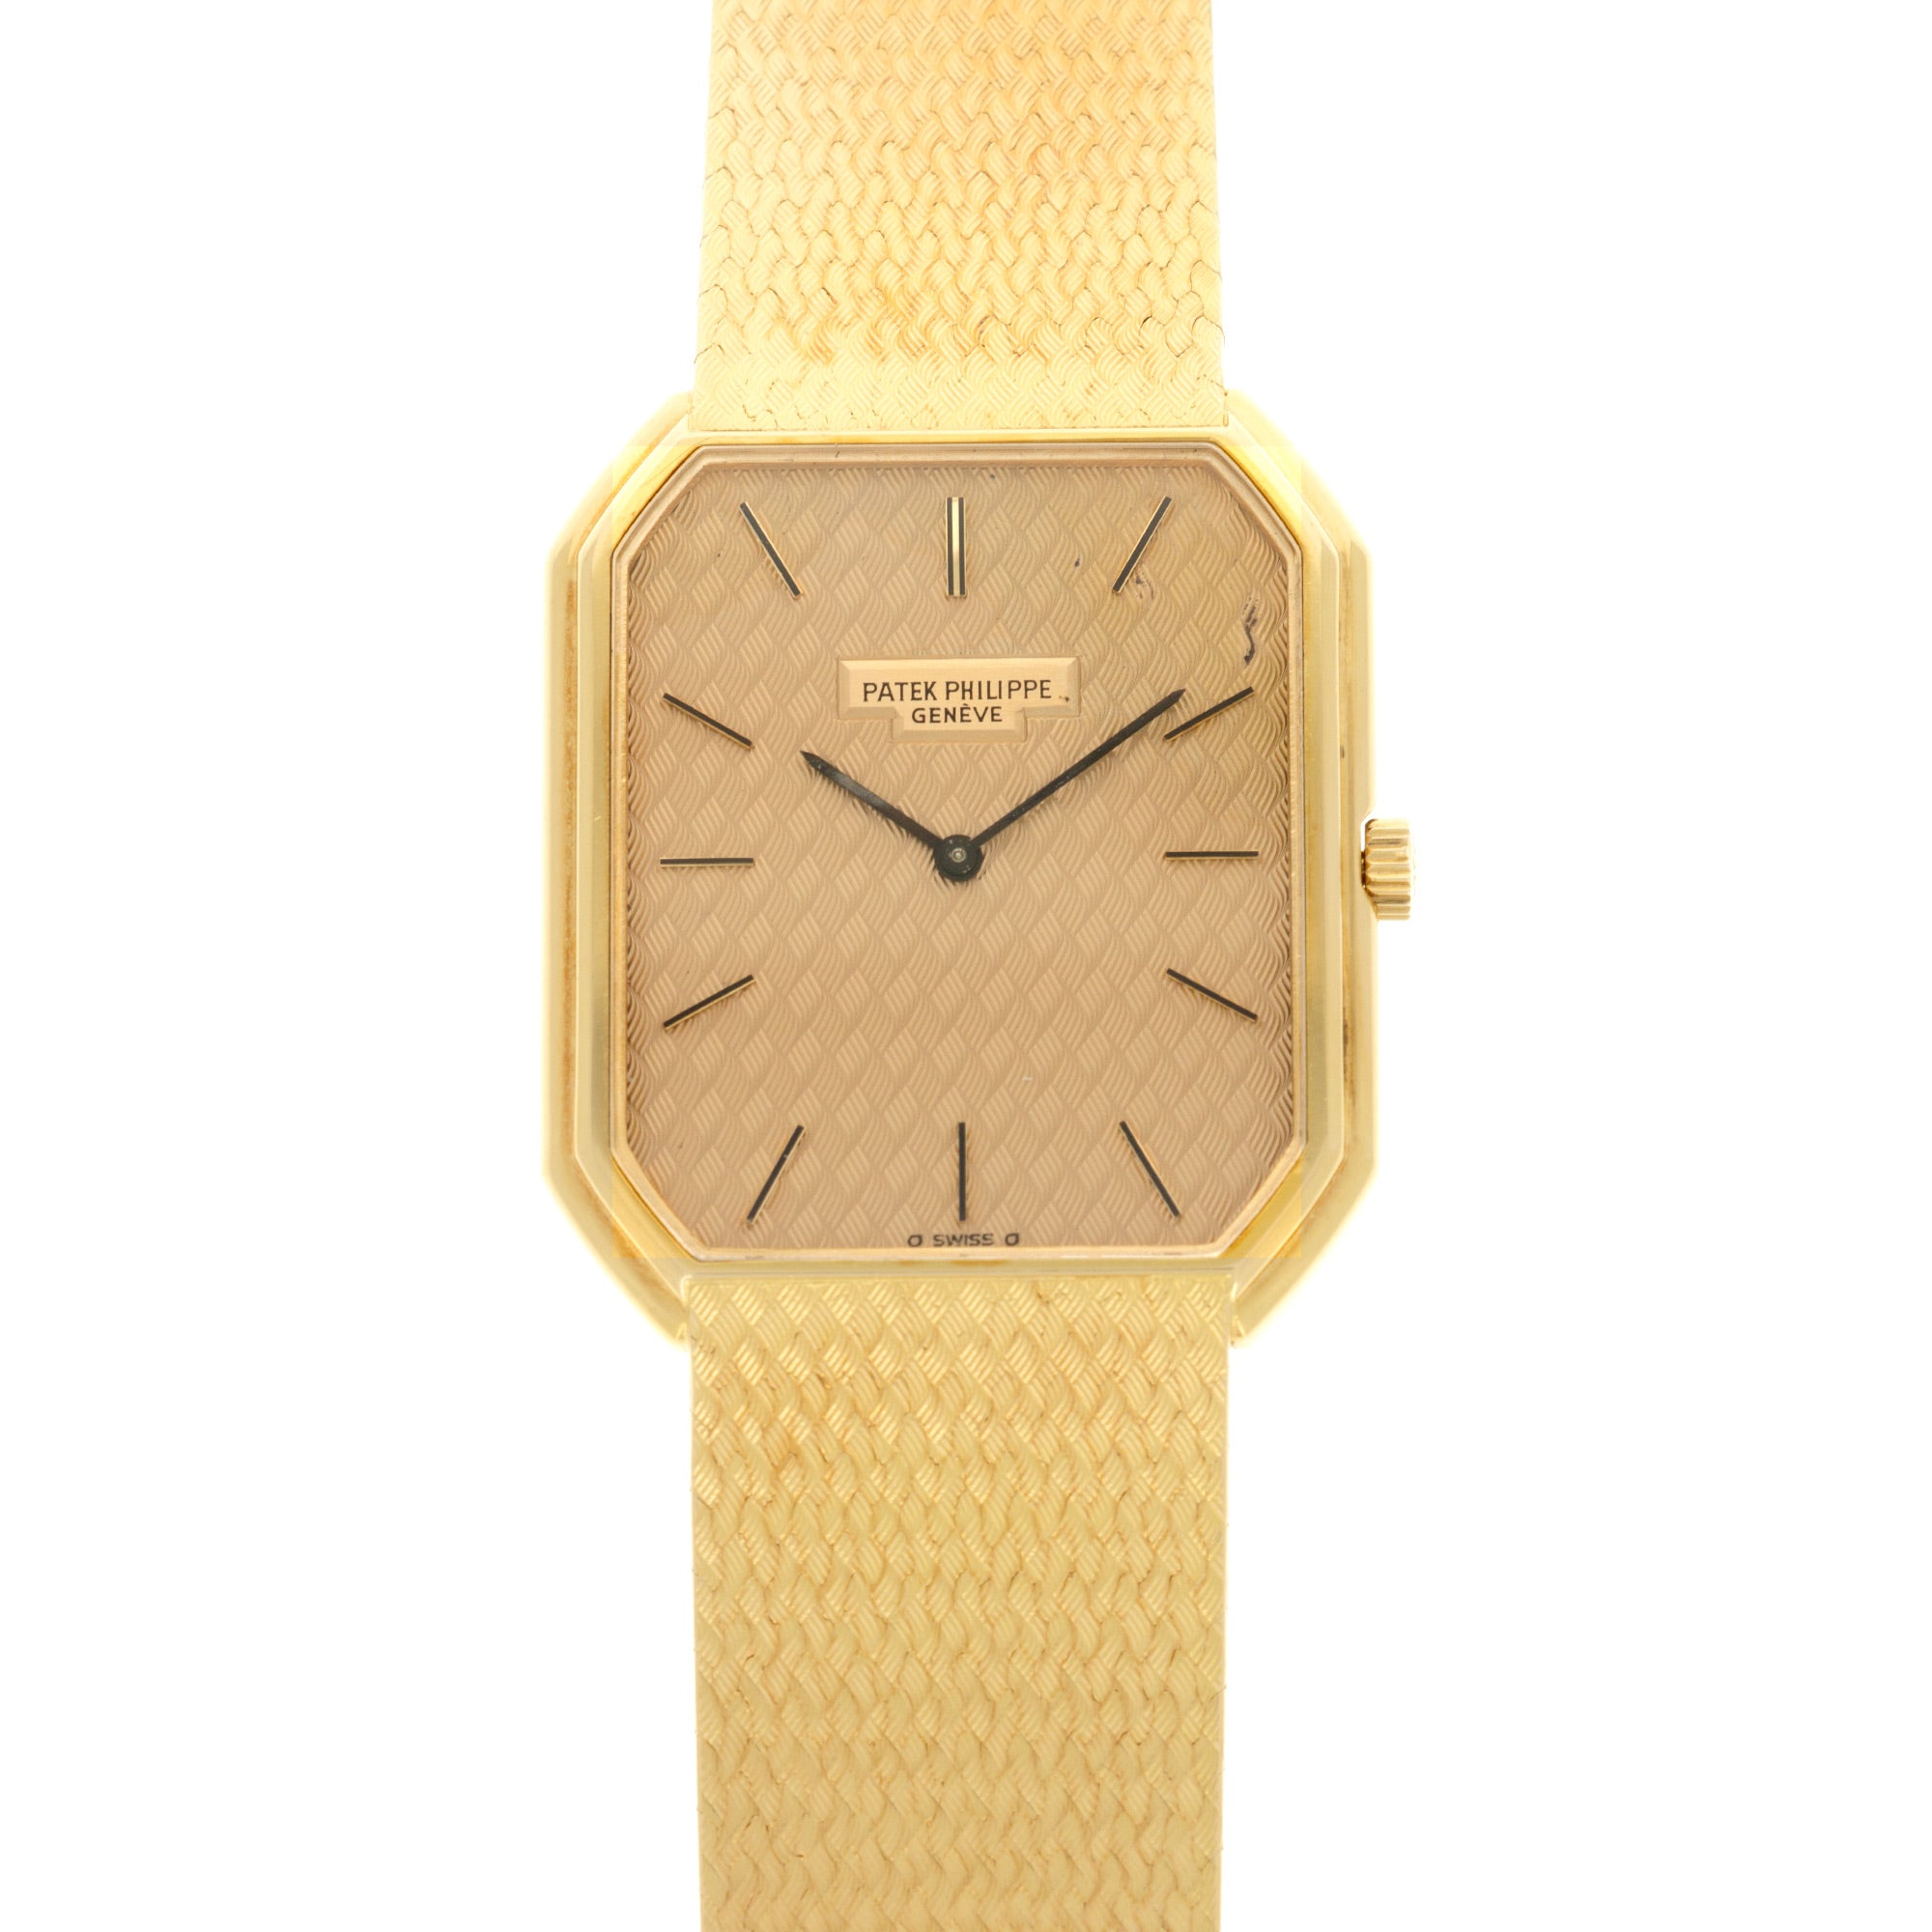 Patek Philippe - Patek Philippe Yellow Gold Bracelet Watch Ref. 3860 with Box and Papers - The Keystone Watches